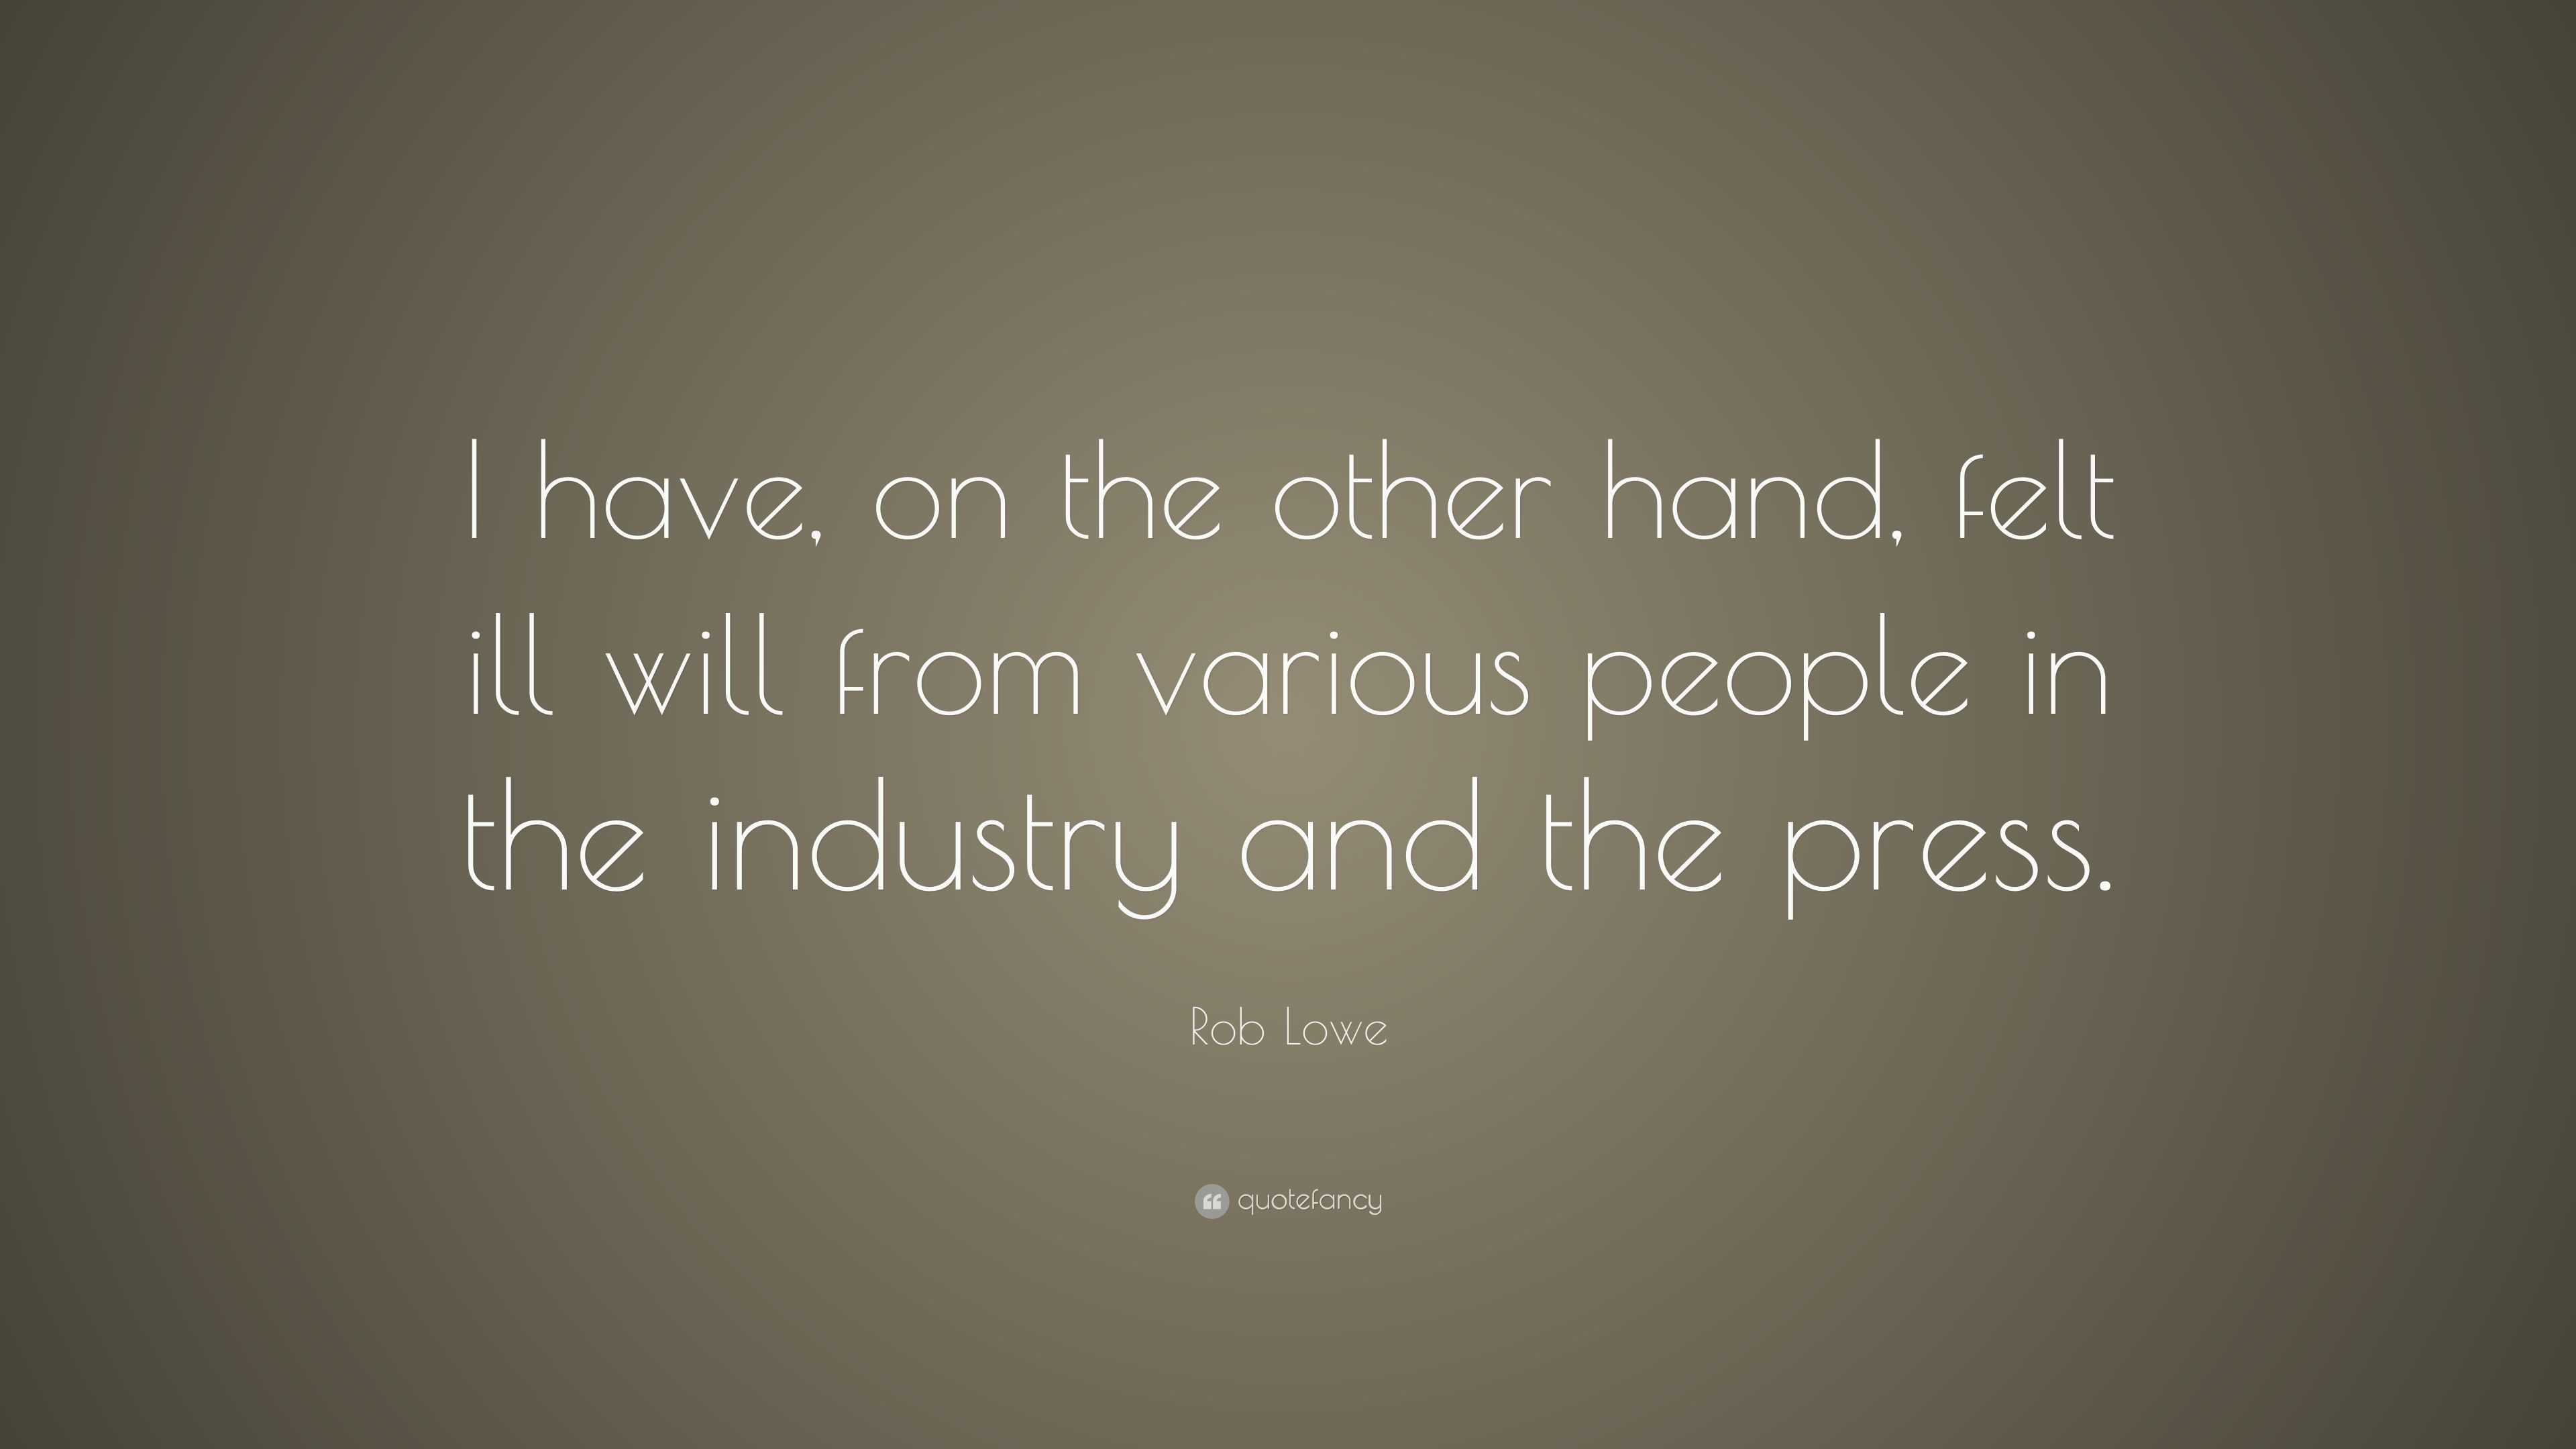 lowe rob ill felt various hand quote industry press wallpapers quotefancy